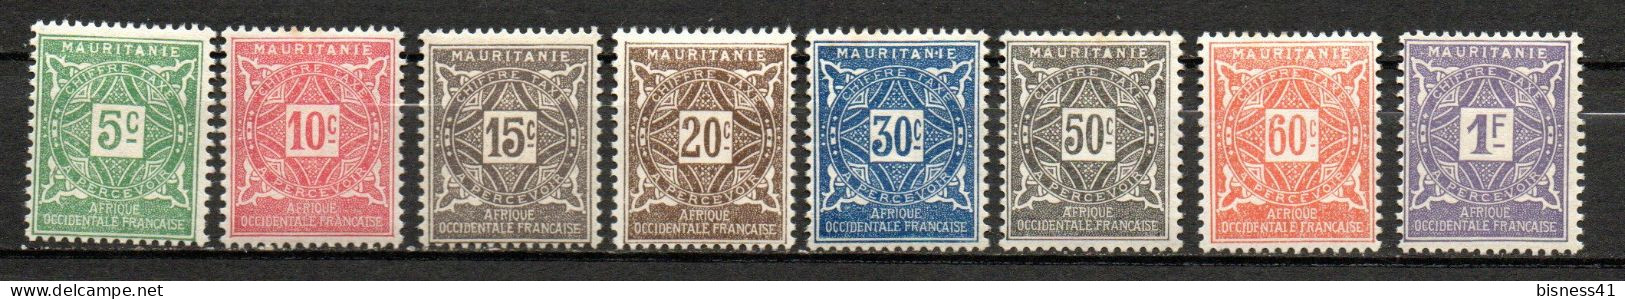 Col33  Colonie Mauritanie Taxe N° 17 à 24 Neuf X MH  Cote : 9,25€ - Used Stamps